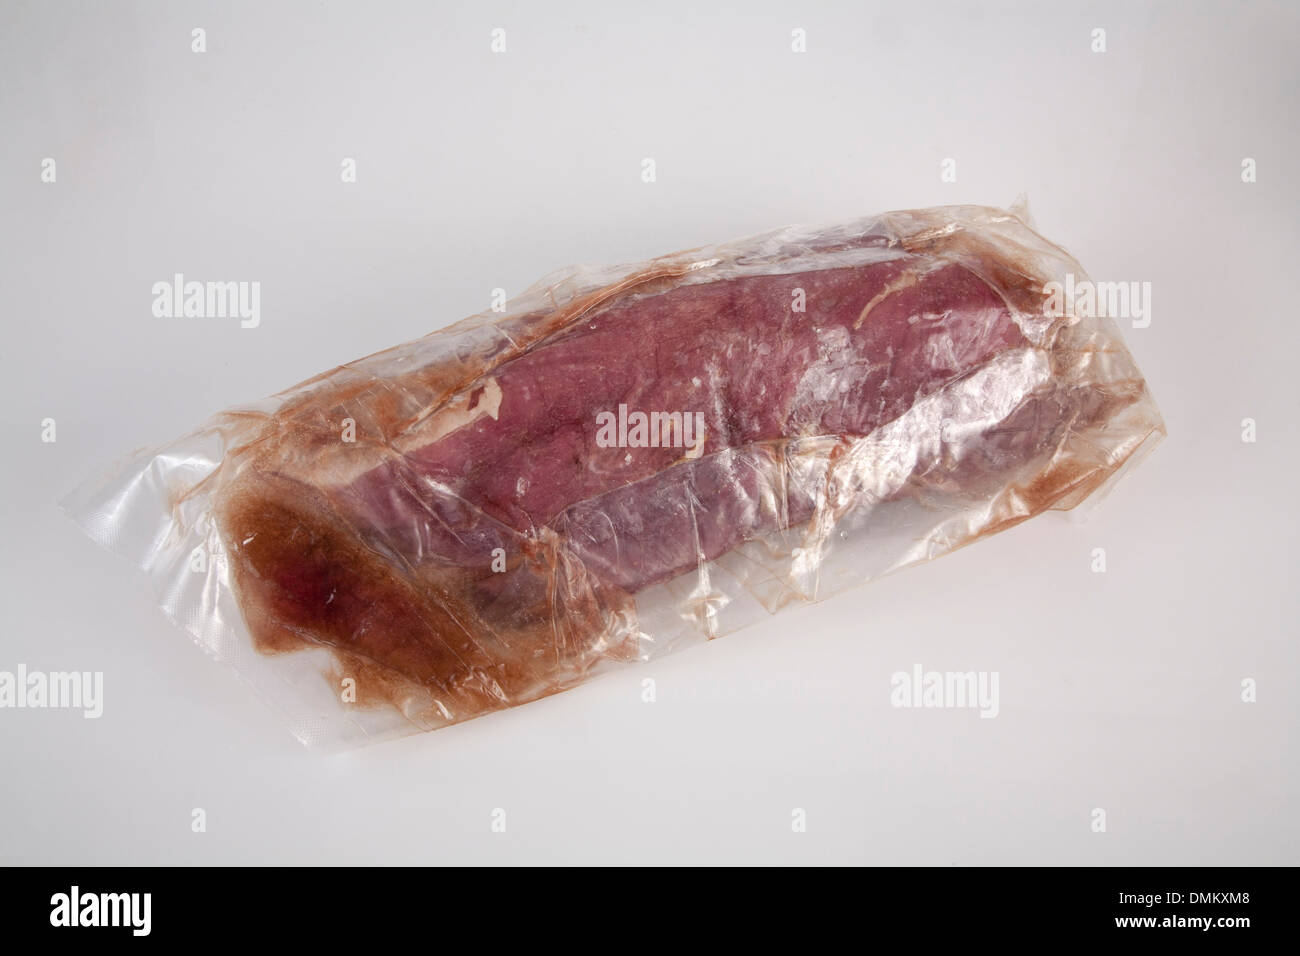 Meat products beef cow pork chicken pieces slice portions frozen presented on ice Stock Photo